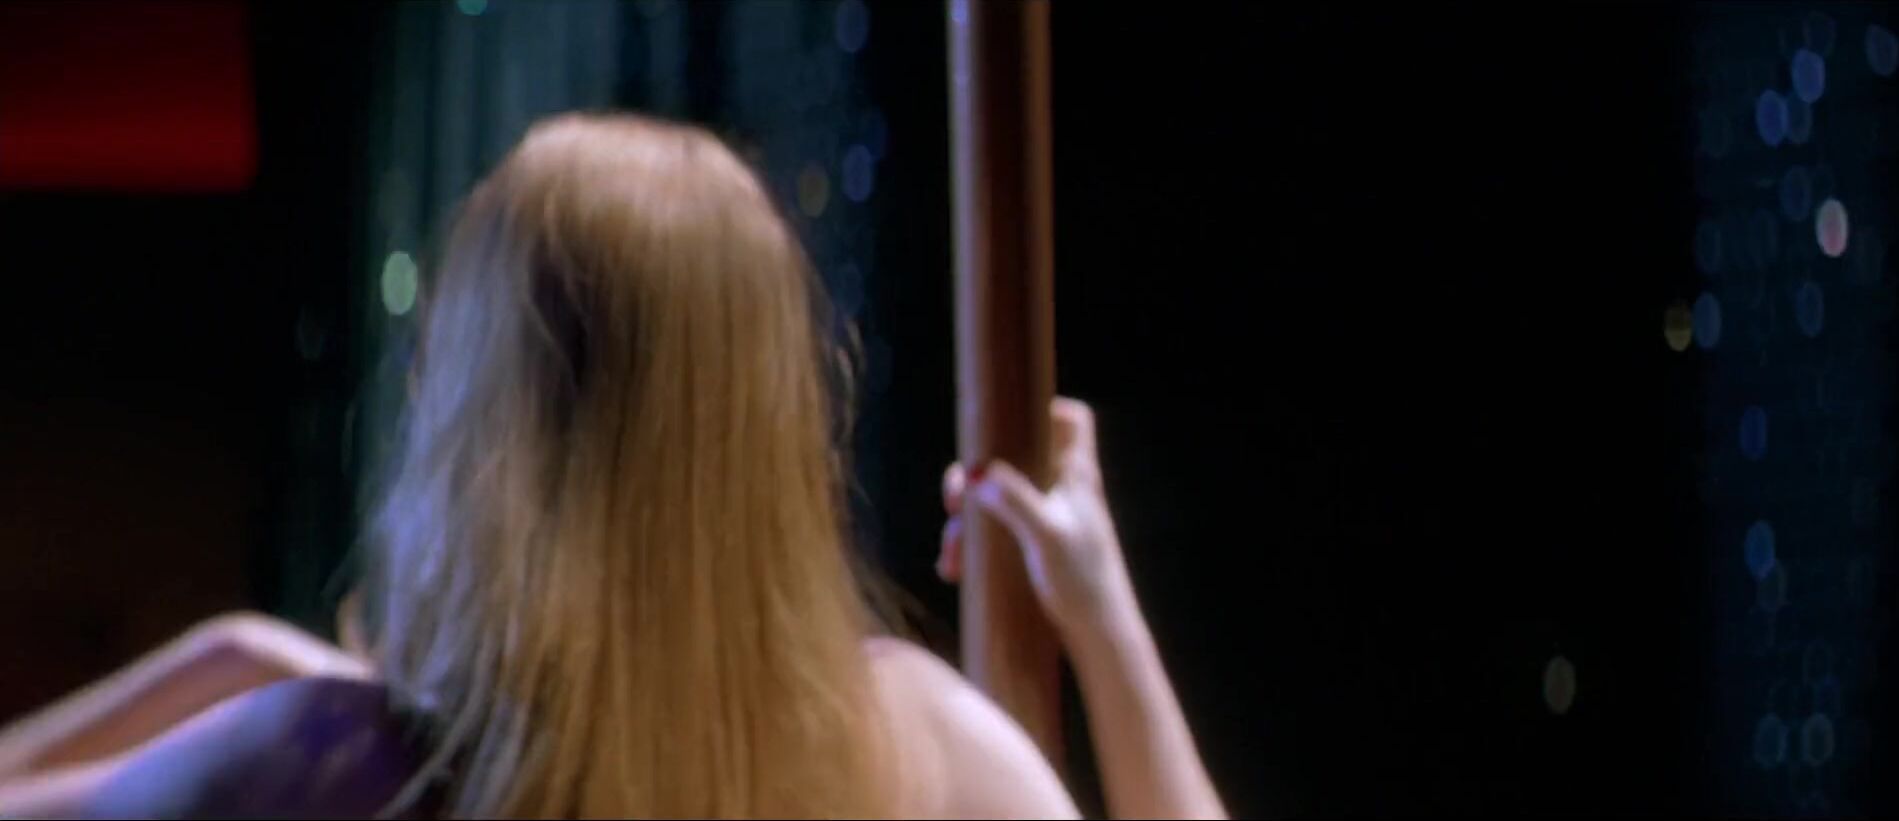 Redbone Jessica Chastain moves around pole and pulls dress down showing boobies in Jolene (2008) Celeb